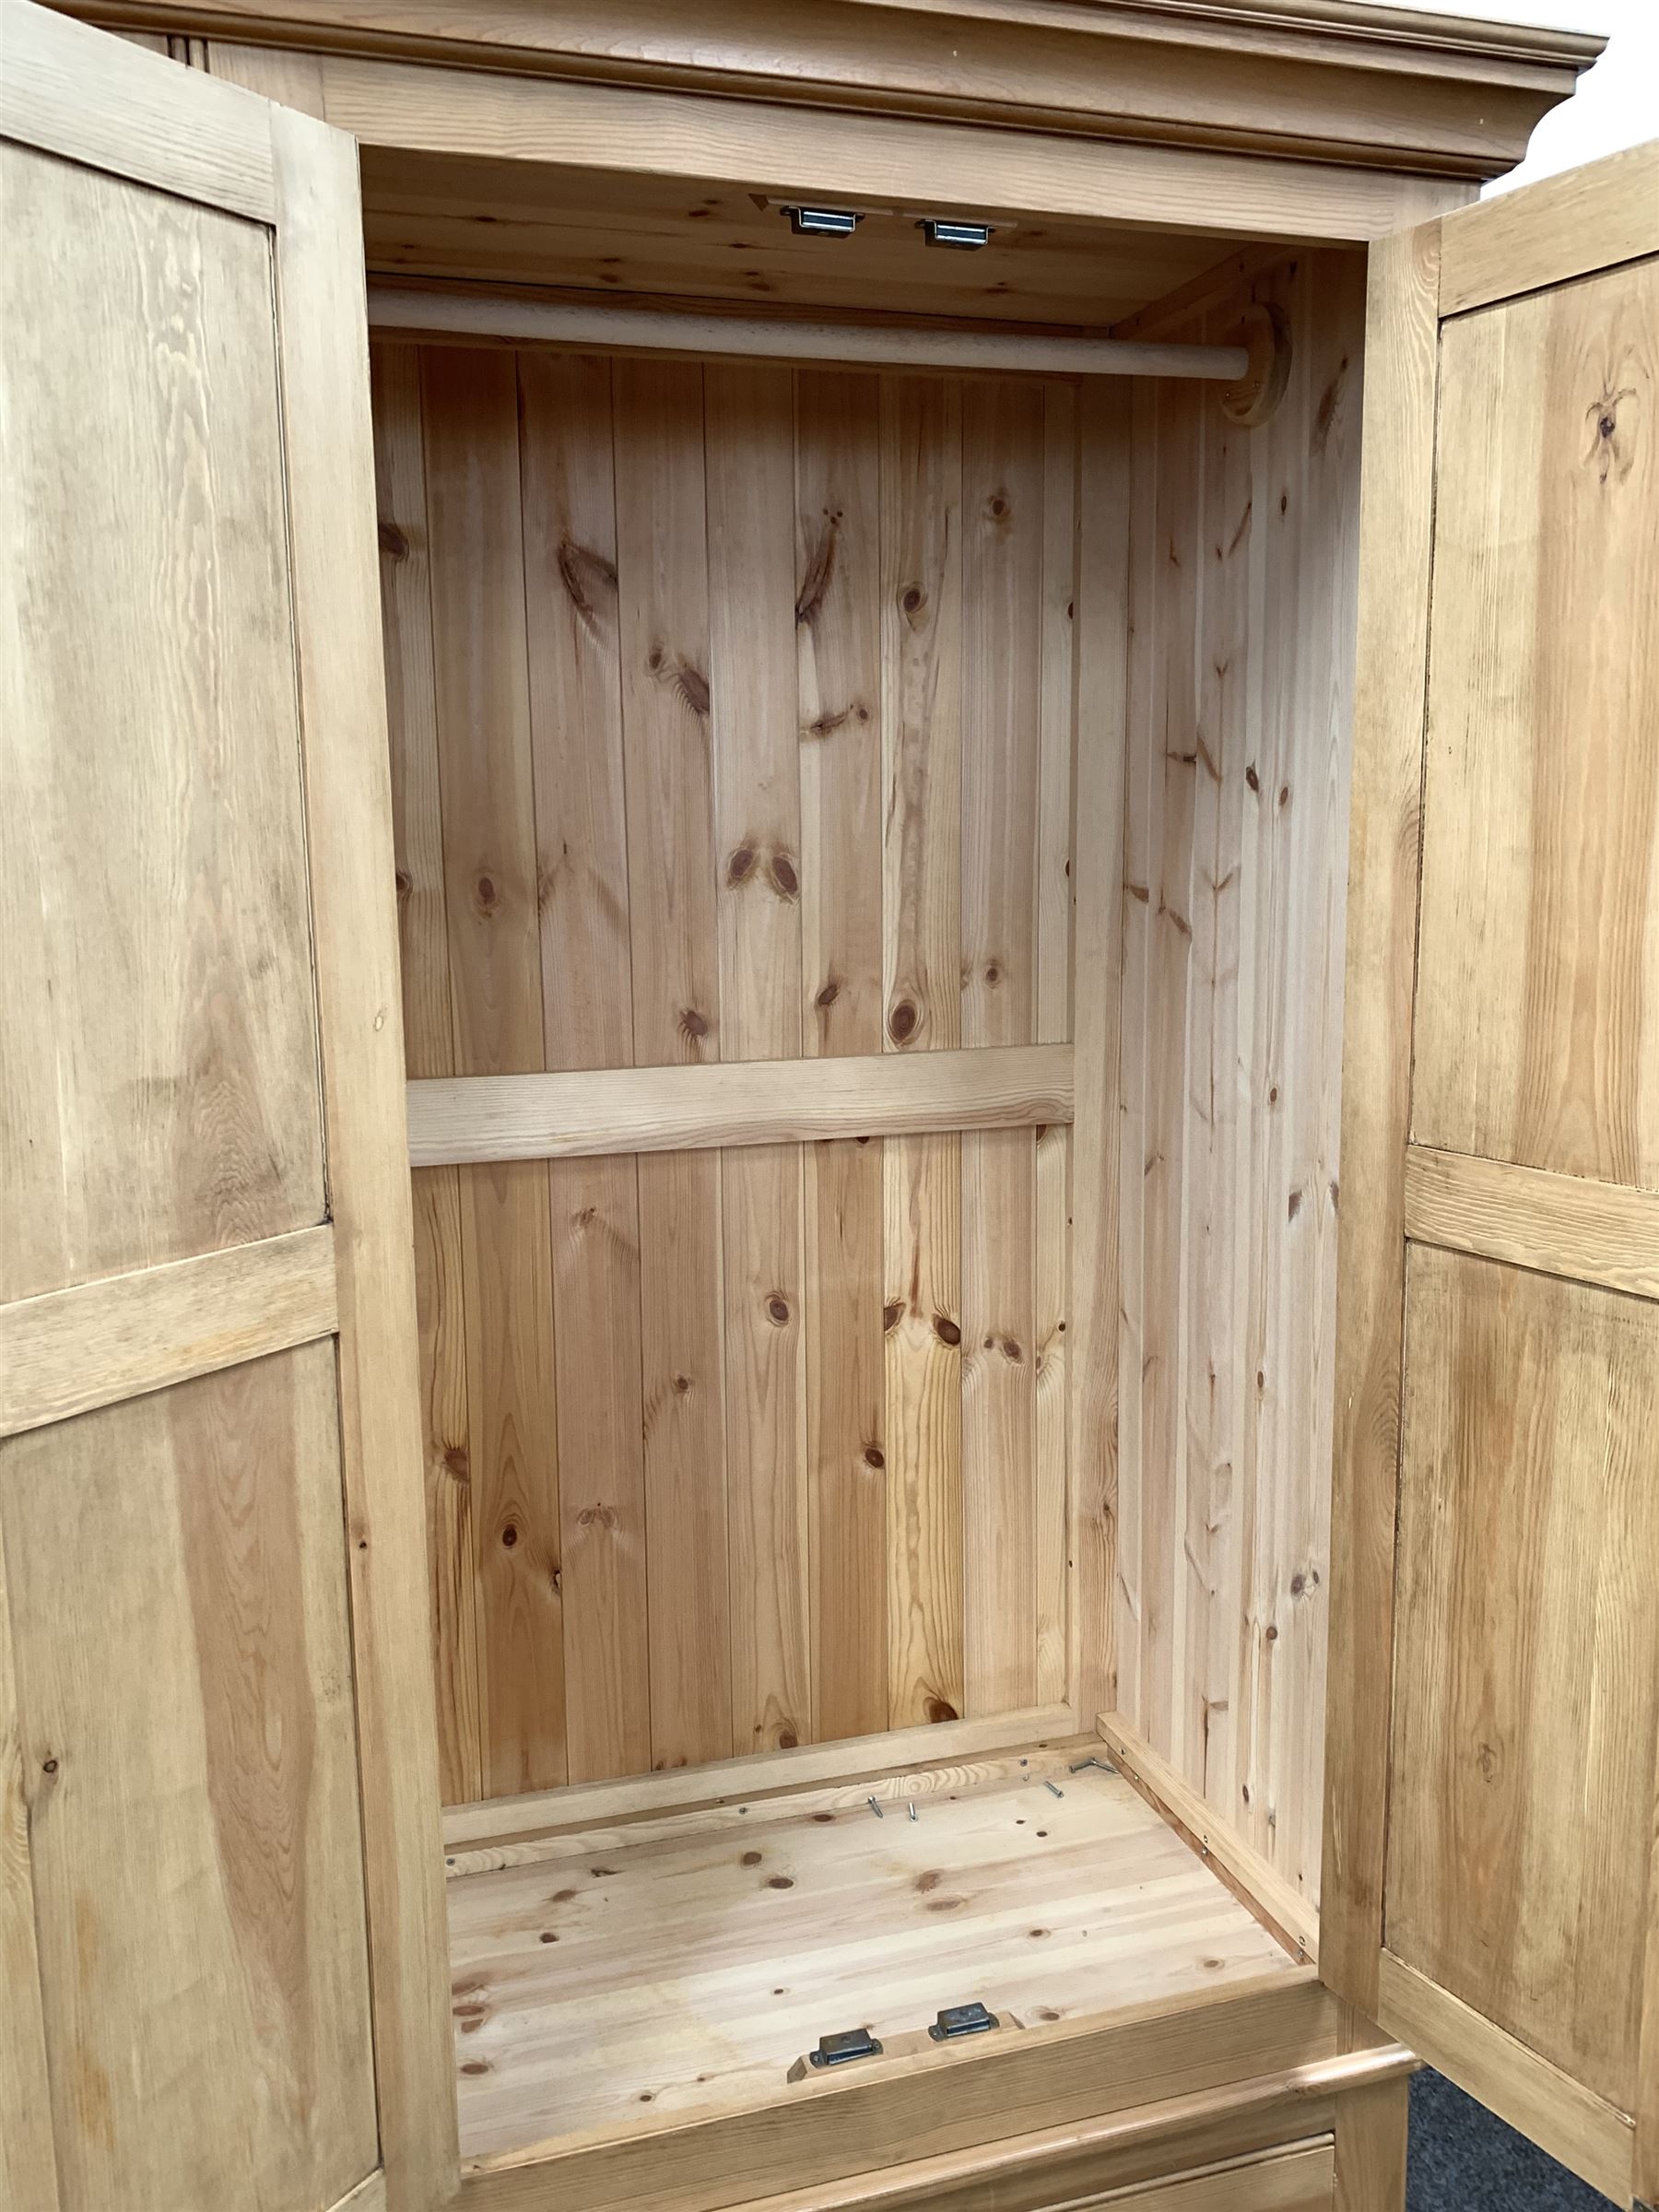 Solid pine four door wardrobe enclosing interior fitted for hanging - Image 3 of 3